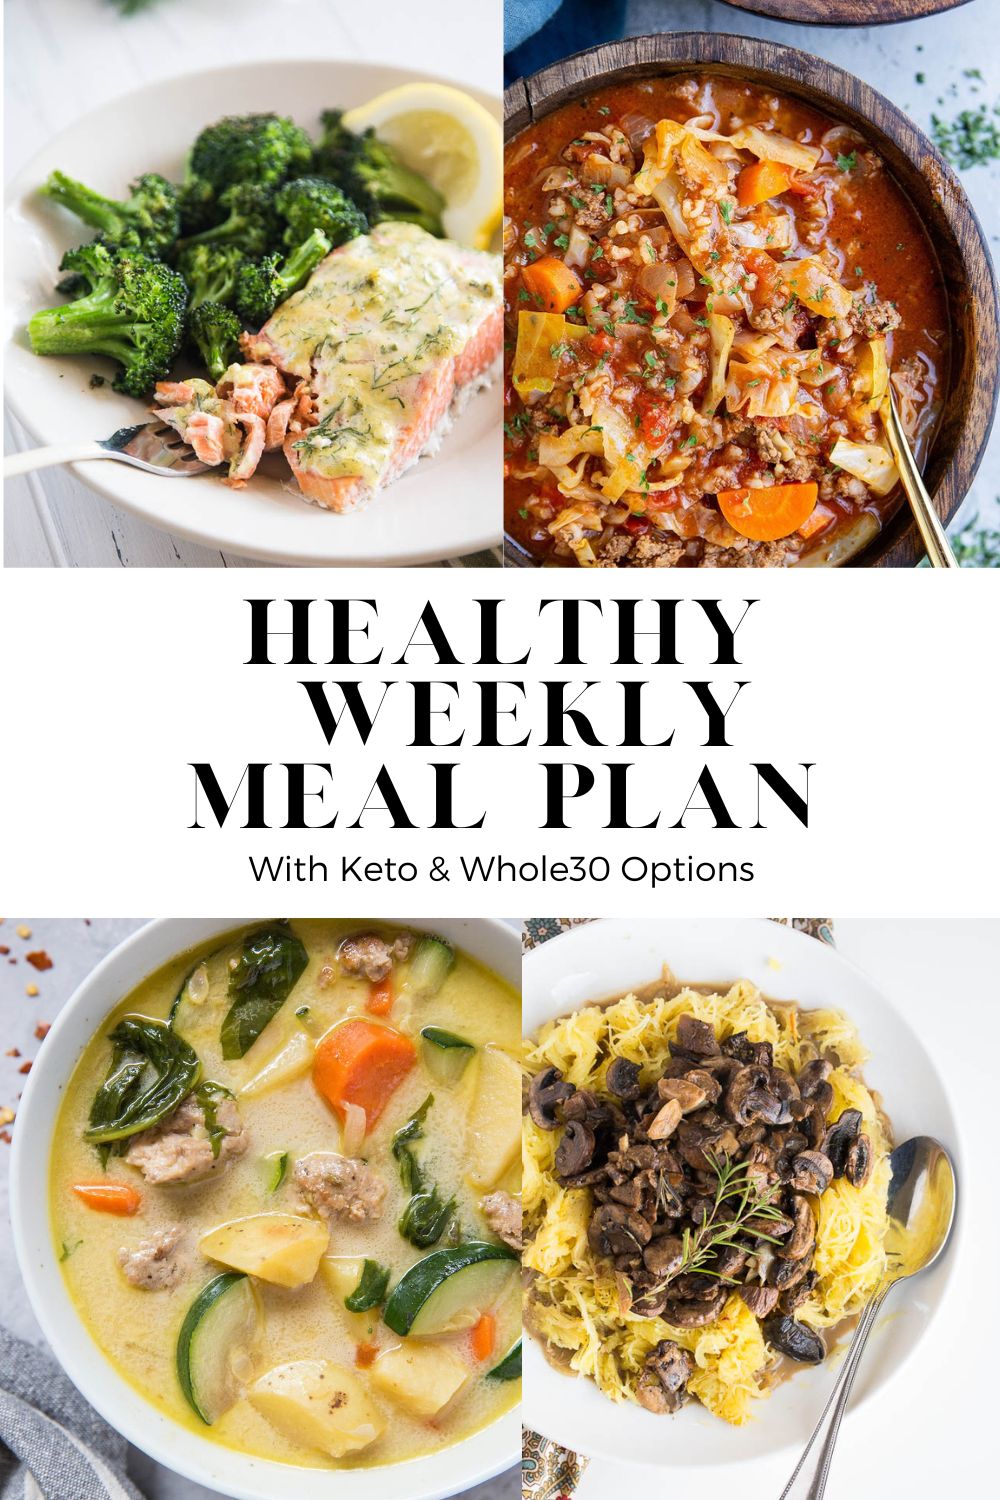 Meal plan graphic for week 42